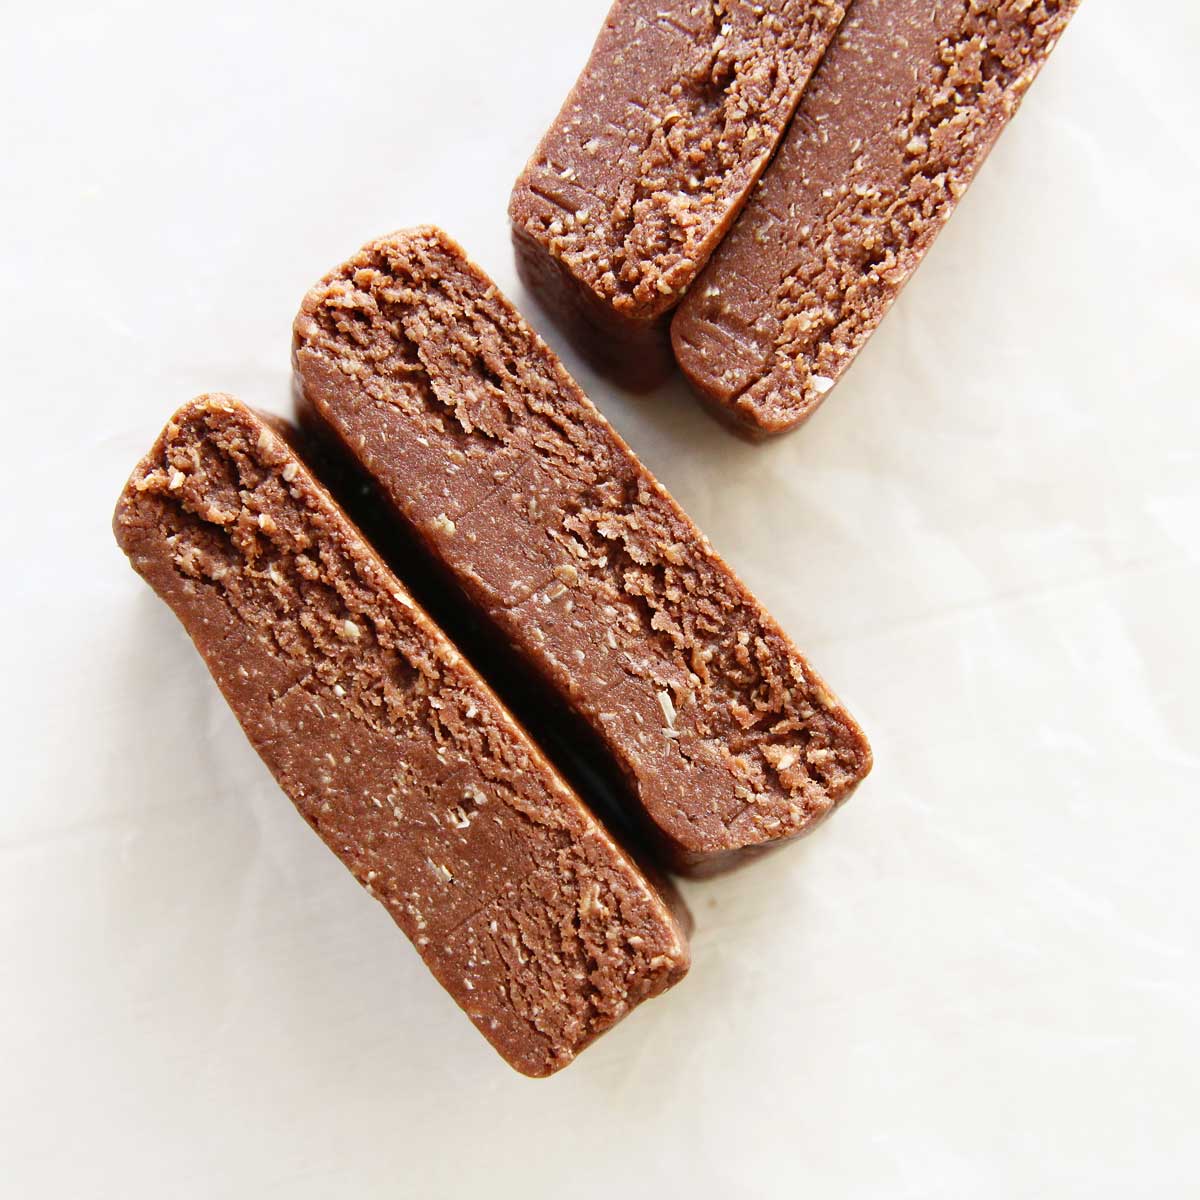 10-Minute Chocolate Peanut Butter Oatmeal Protein Bars - Almond Joy Protein Bars